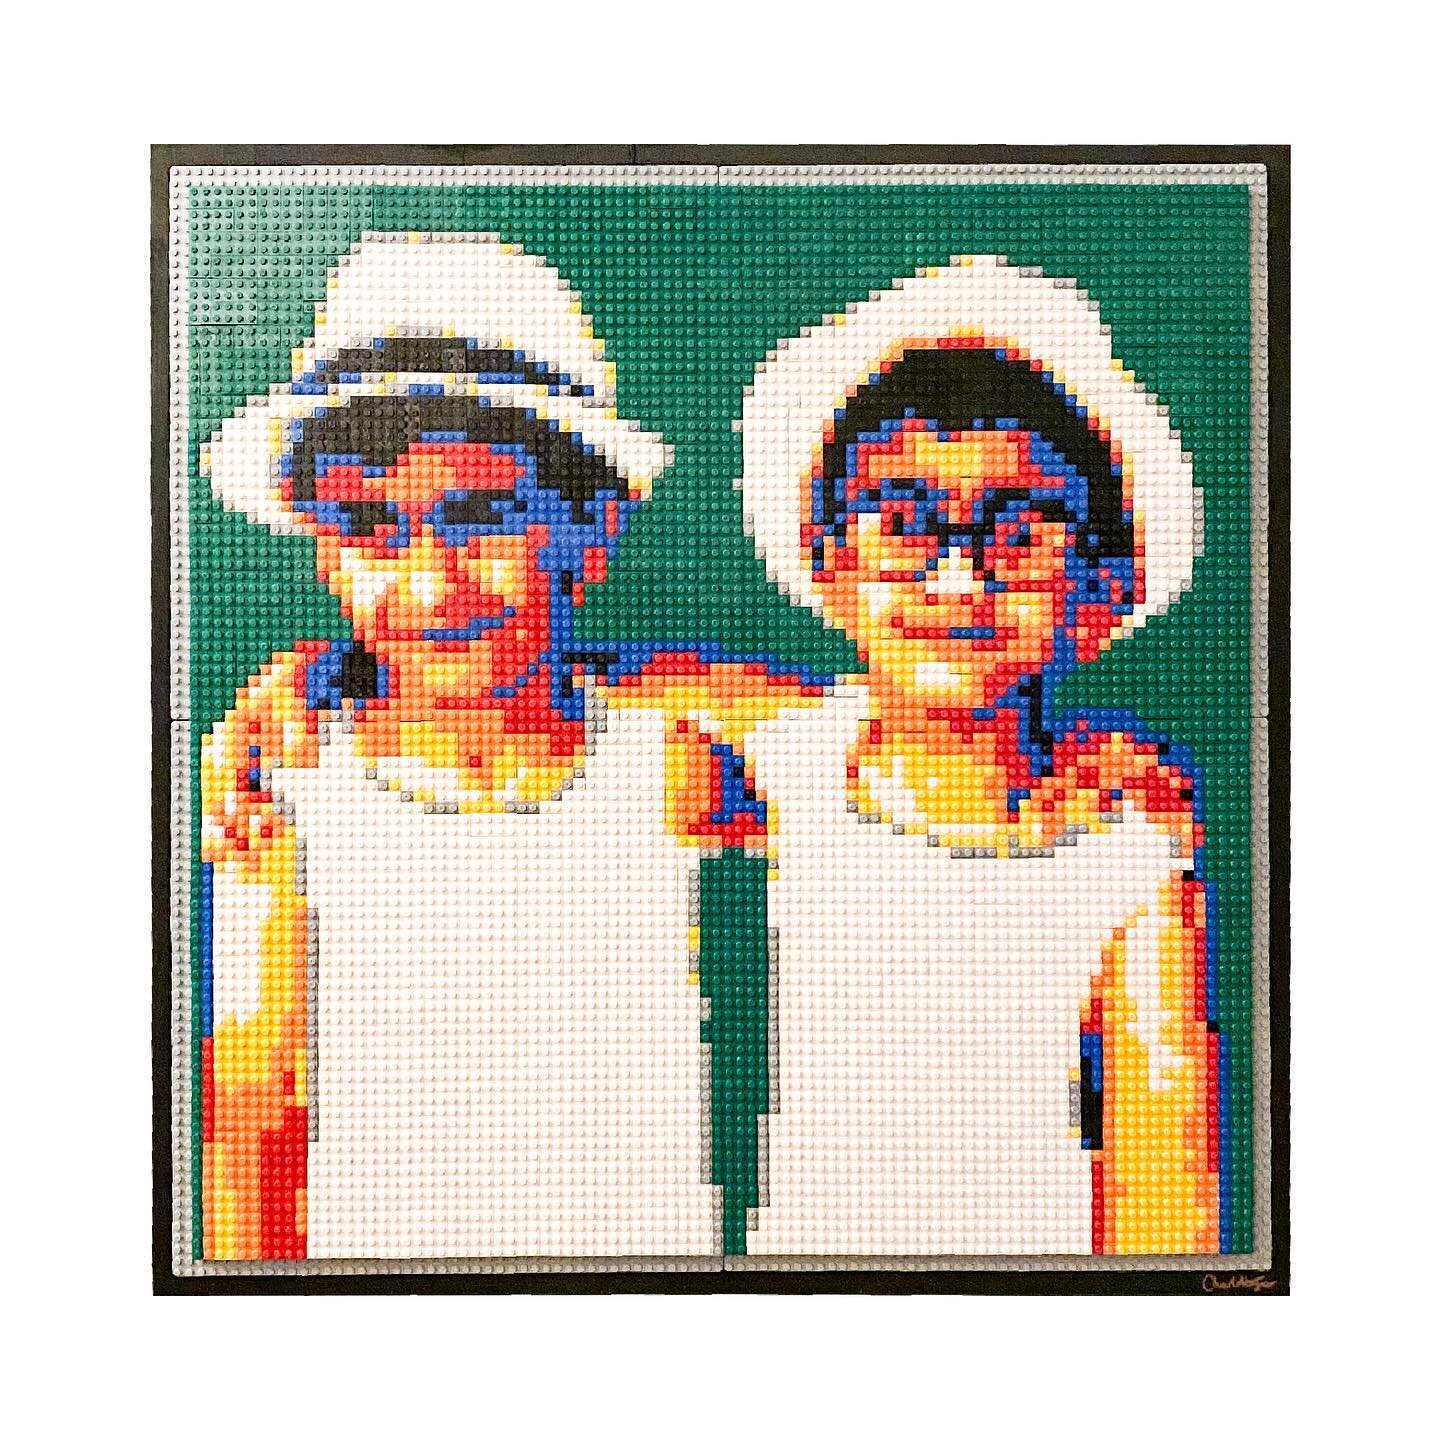 Commission piece for two twin boys 👬
Swipe ➡️ to see process, in situ &amp; the original photograph ☺️❤️ 
Please let me know what you think in the comments below ✨

#twins #love #twinsofinstagram #twinning #twinbrothers #legoart  #twinstagram #broth